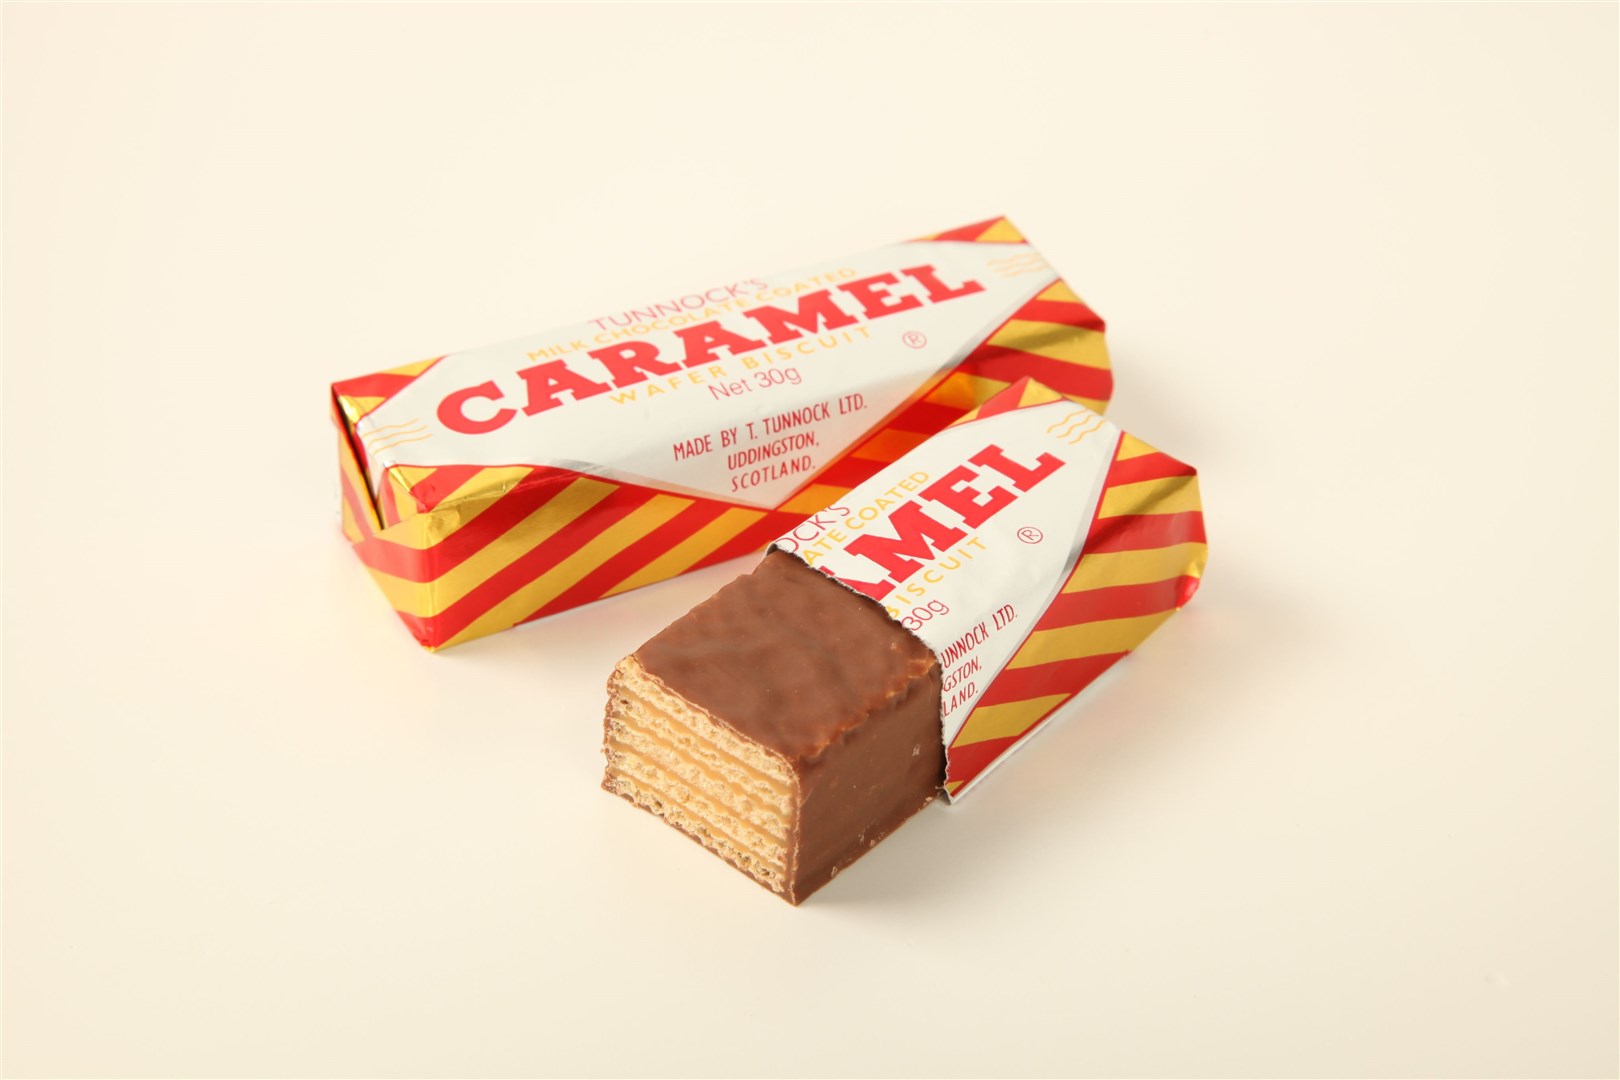 While Tunnock's caramel wafers will often hit the spot for the homesick blues, sometimes the urge for banter is stronger.